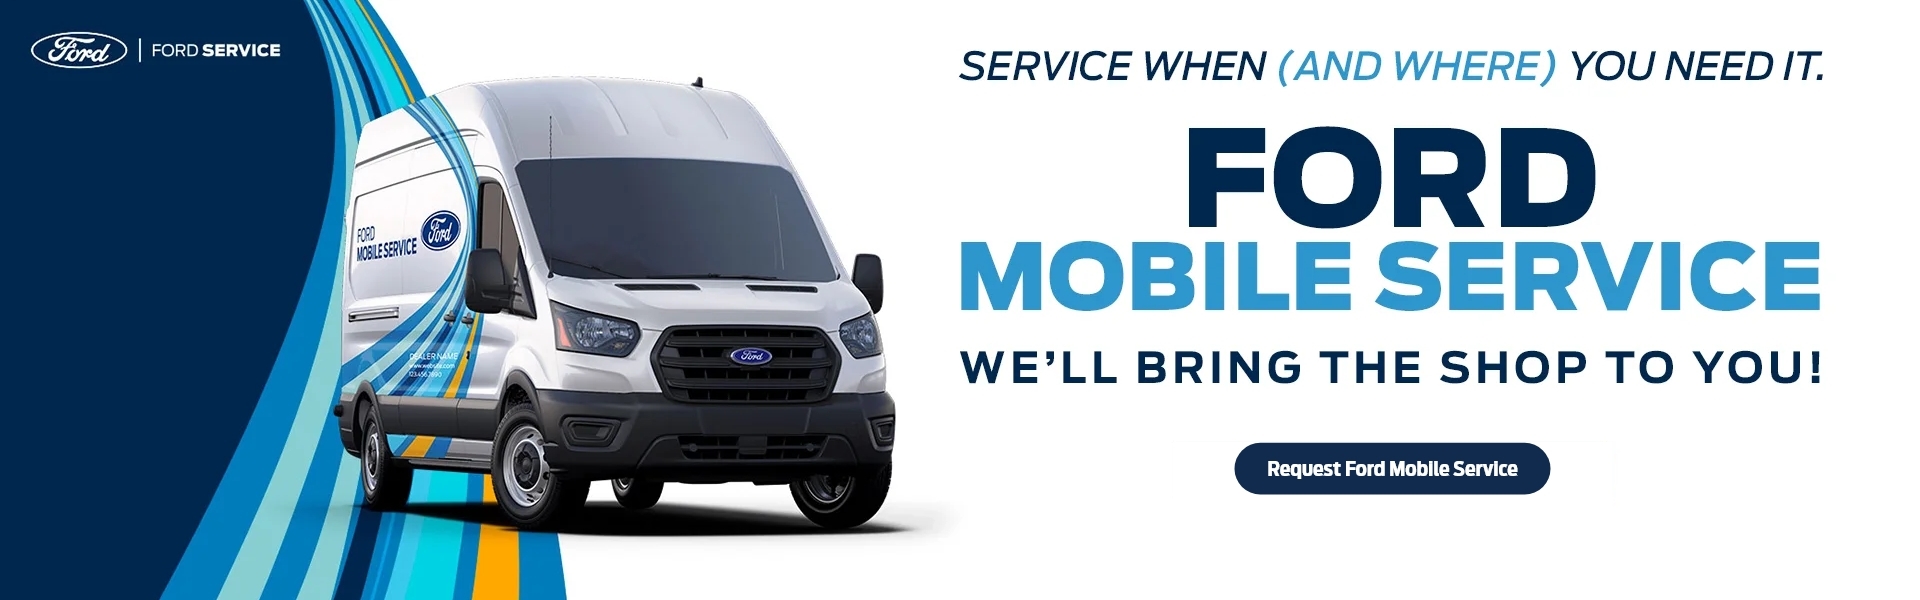  Ford Mobile Service in Westland, MI- Service when and where you need it- Request Ford Mobile Service 